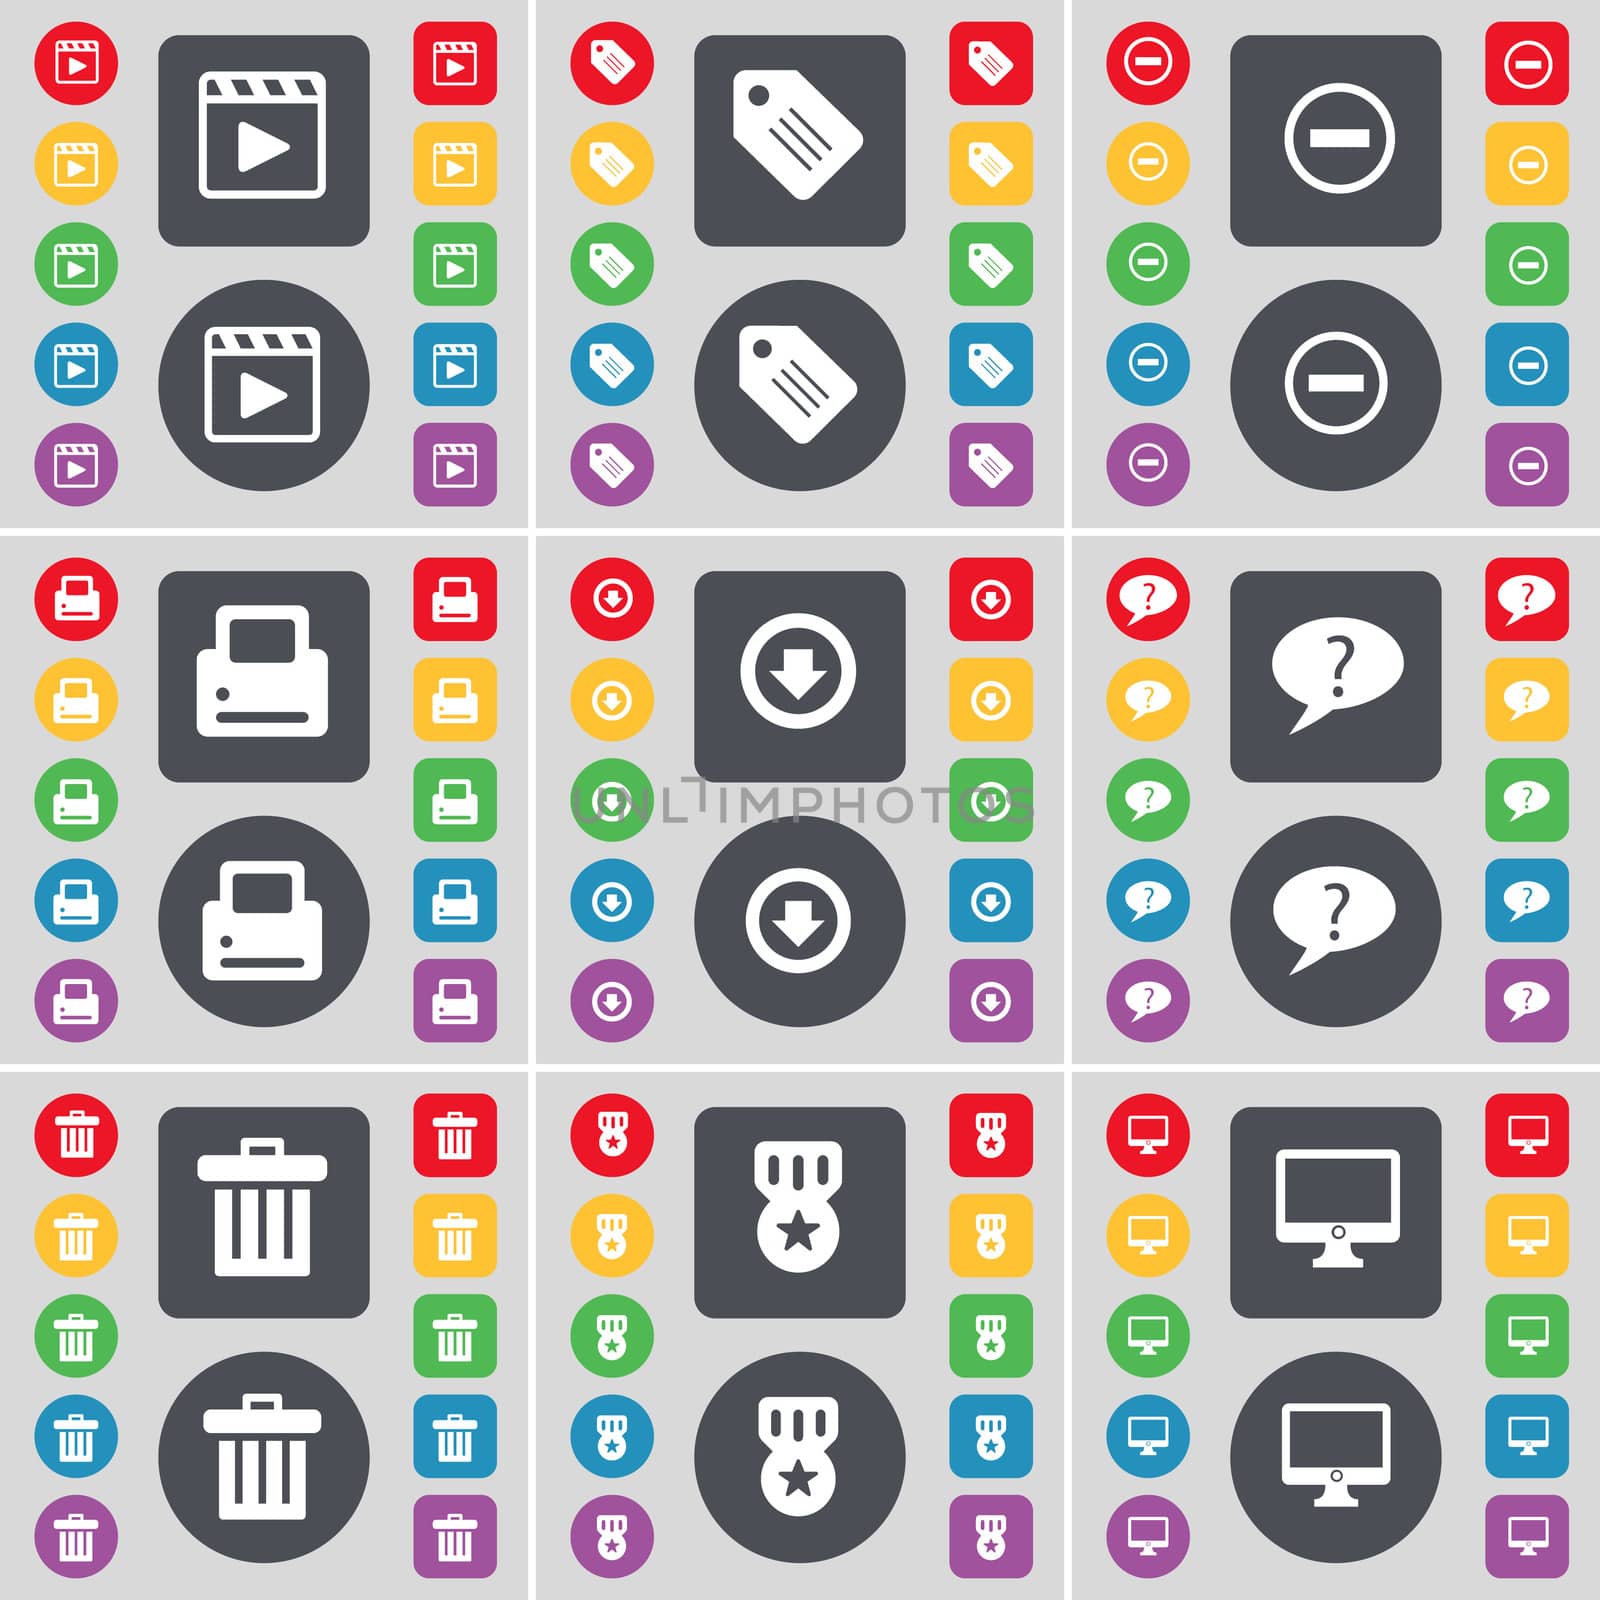 Media player, Tag, Minus, Printer, Arrow down, Chat bubble, Trash can, Medal, Monitor icon symbol. A large set of flat, colored buttons for your design.  by serhii_lohvyniuk